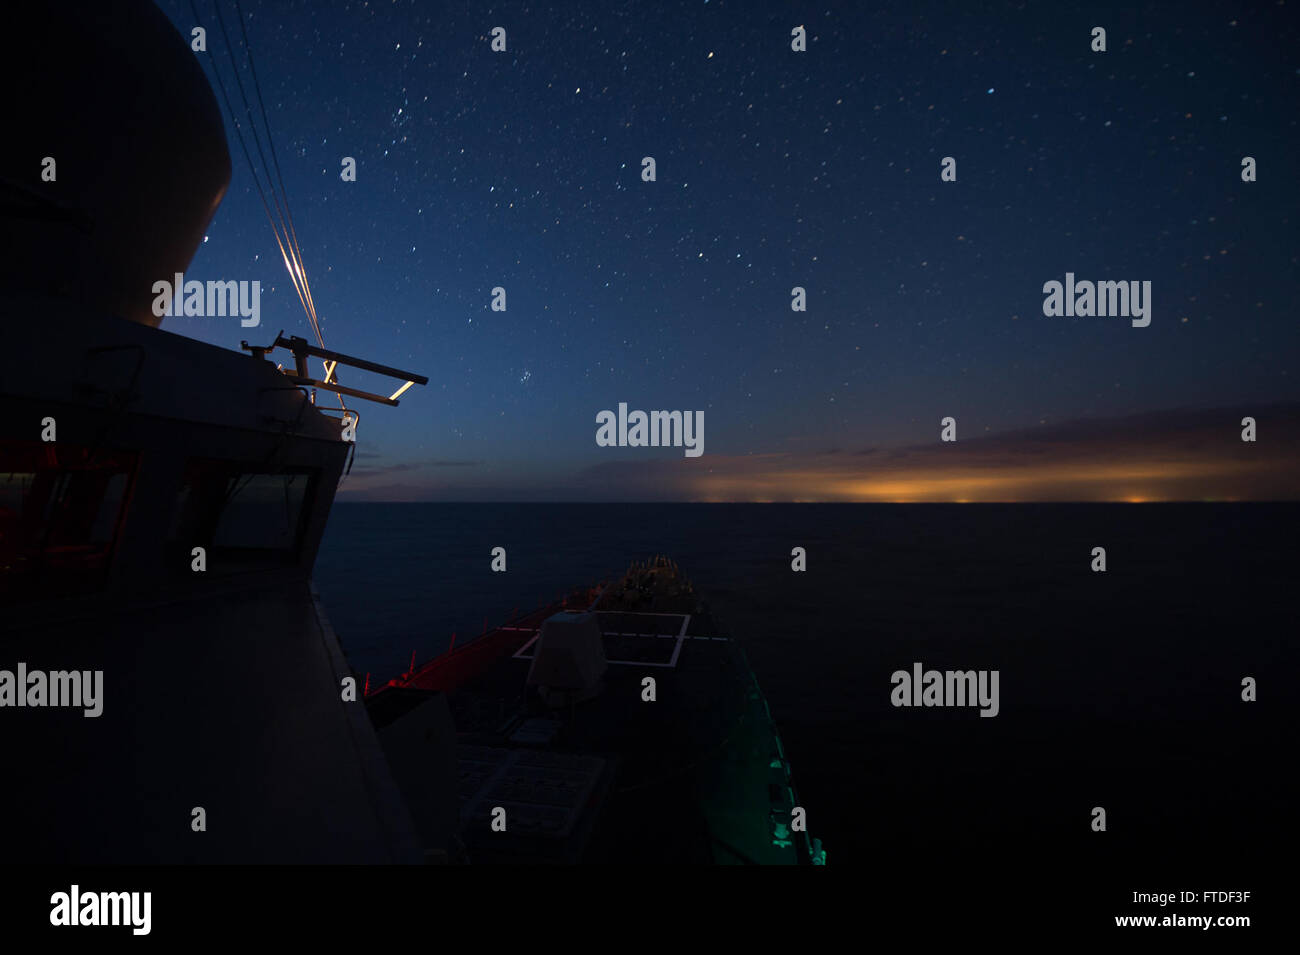 150724-N-ZE250-014 BALTIC SEA (July 23, 2015) USS Jason Dunham (DDG 109) operates at night in the Baltic Sea July 24, 2015. Jason Dunham, an Arleigh Burke-class guided-missile destroyer homeported in Norfolk, is conducting naval operations in the U.S. 6th Fleet area of operations in support of U.S. national security interests in Europe. (U.S. Navy photo by Mass Communication Specialist 3rd Class Weston Jones/Released) Stock Photo